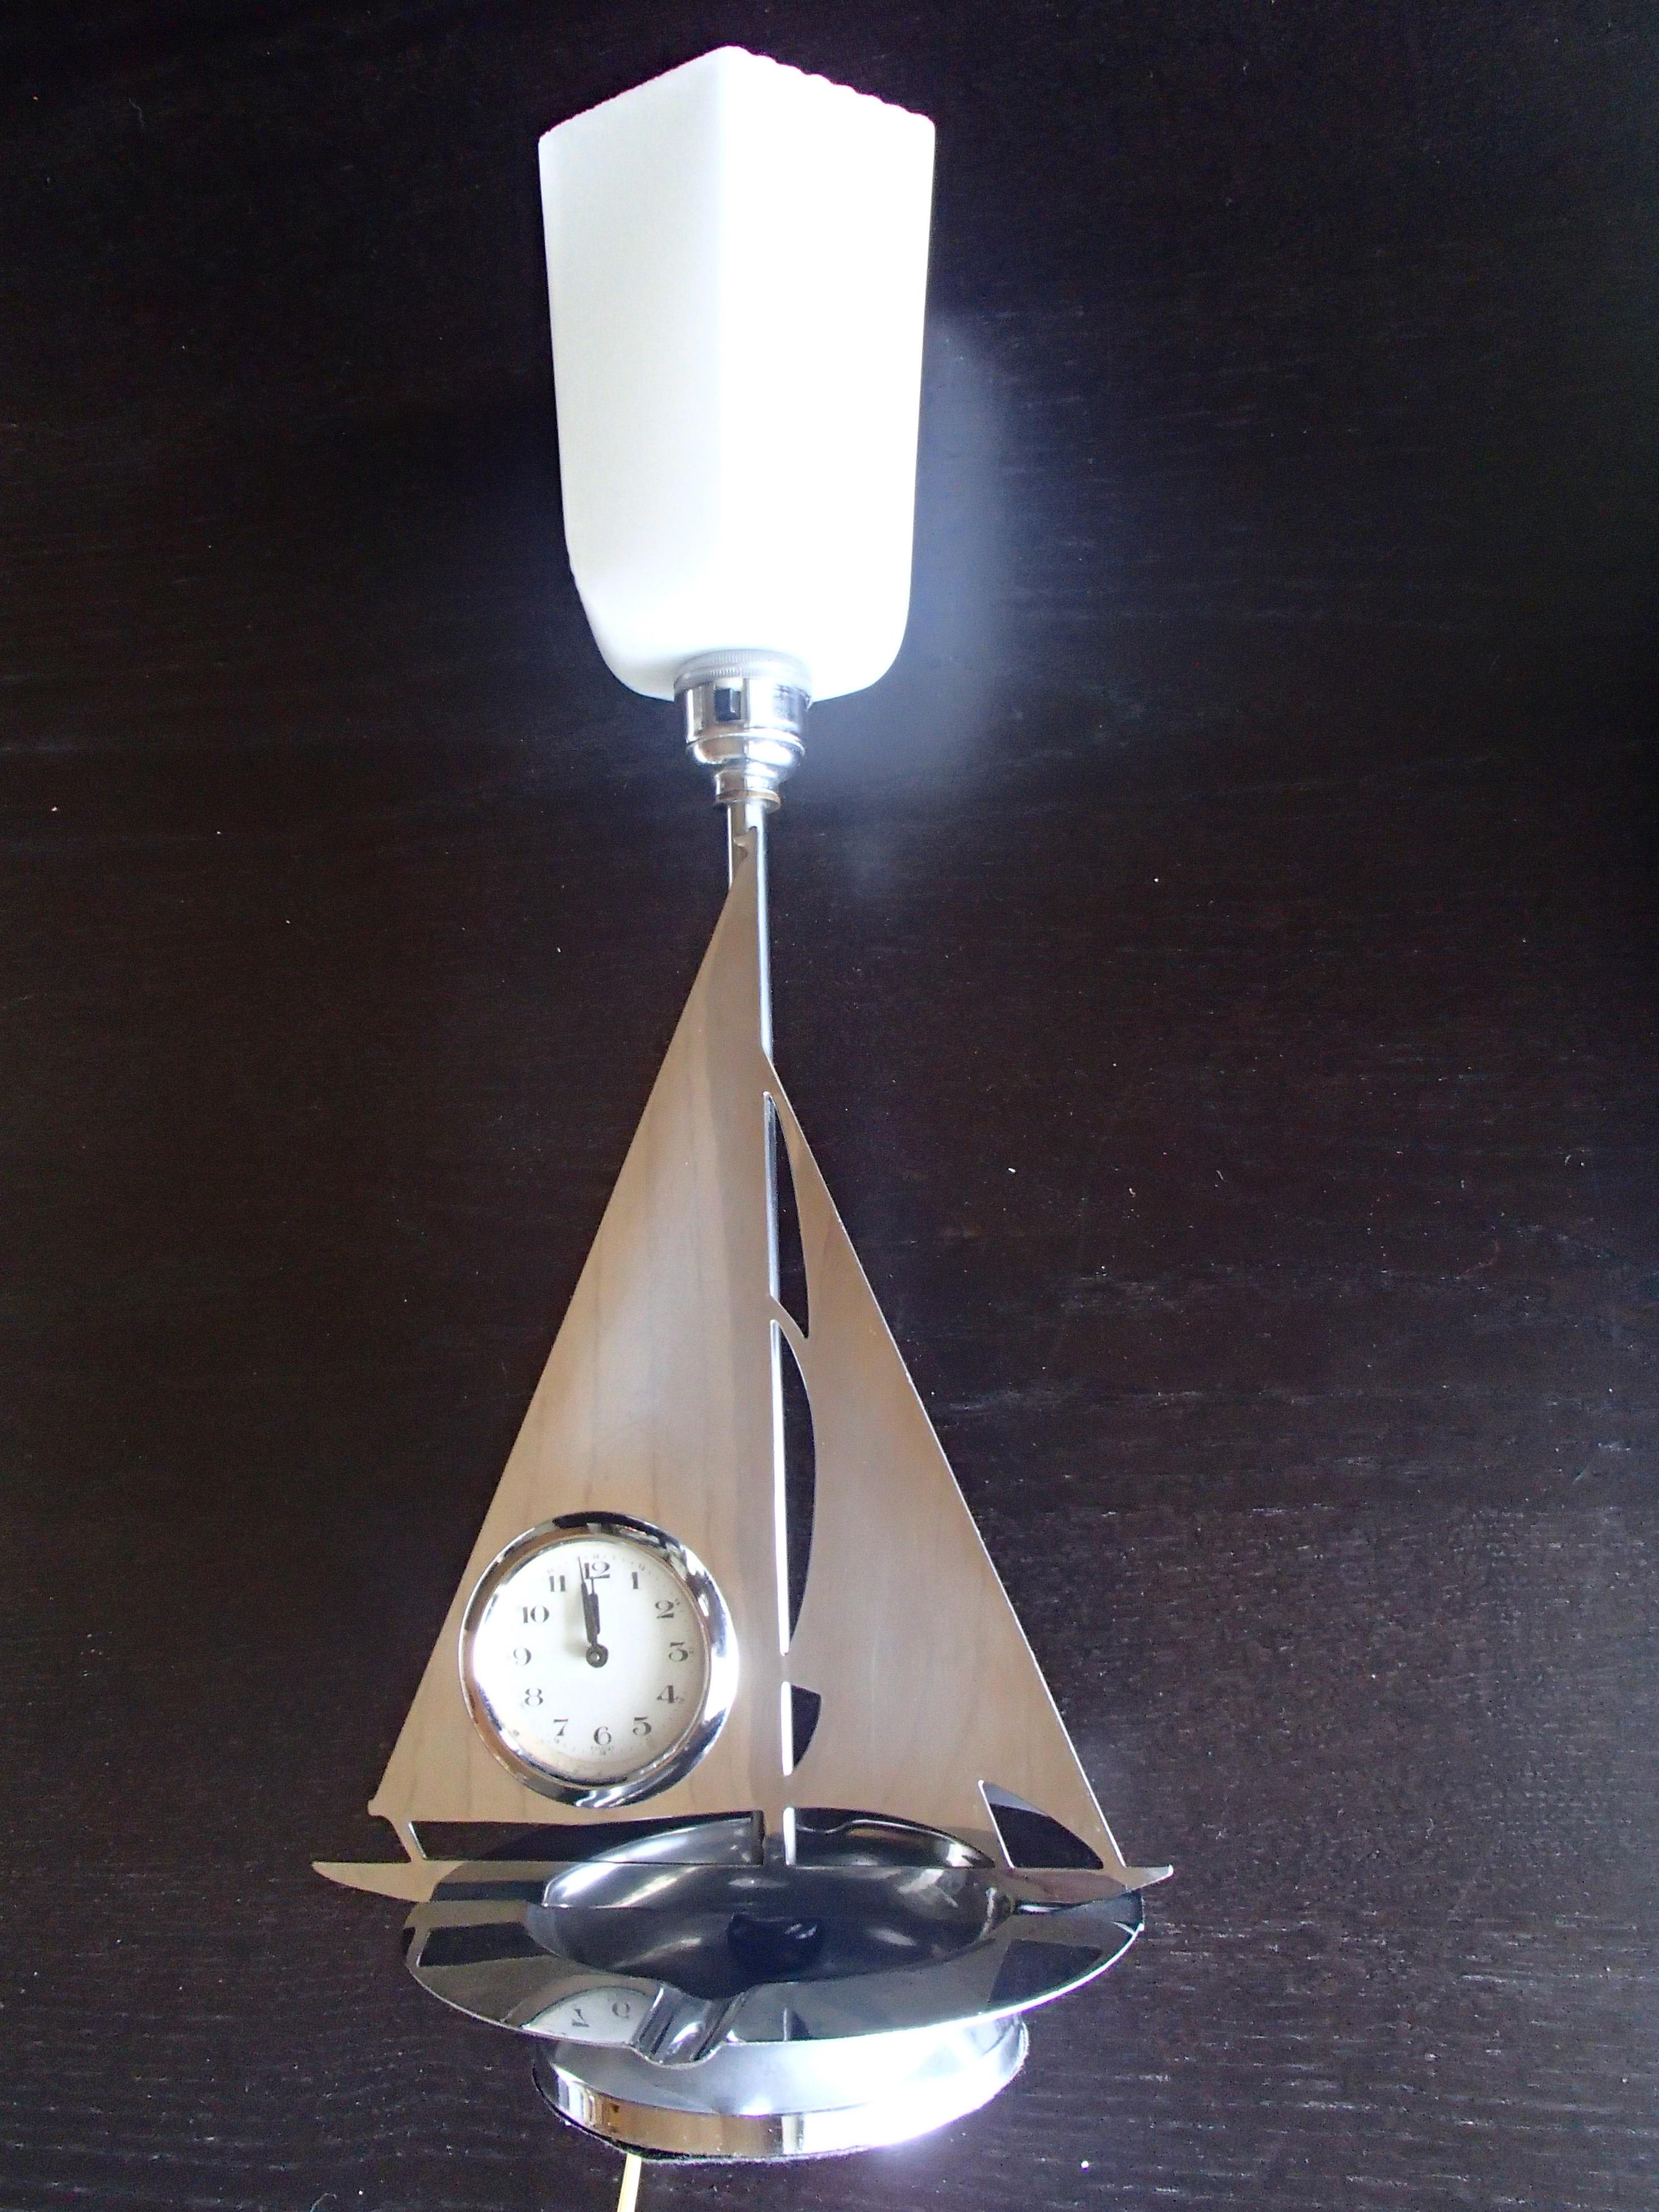 Art Deco chrom sailing boat table lamp with clock and ashtree.